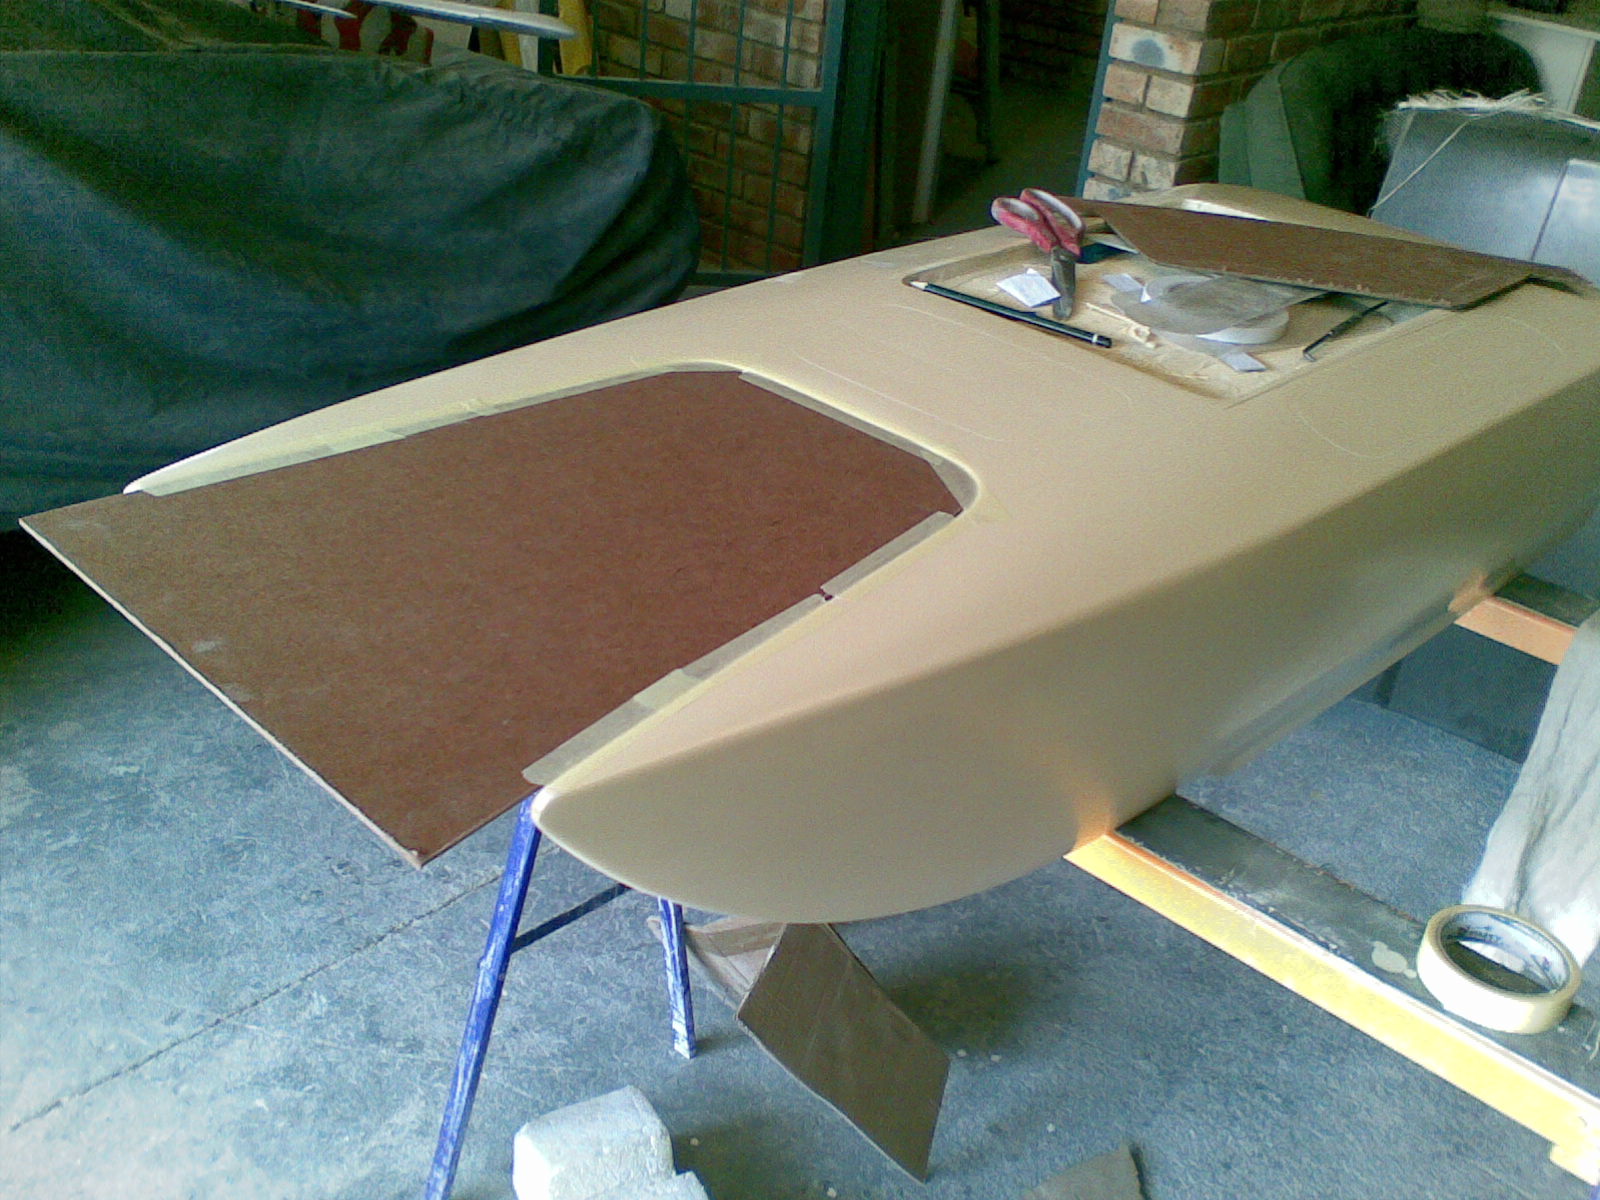 Rc Bait Boat Plans Wooden chris craft plans | Spill To Jill